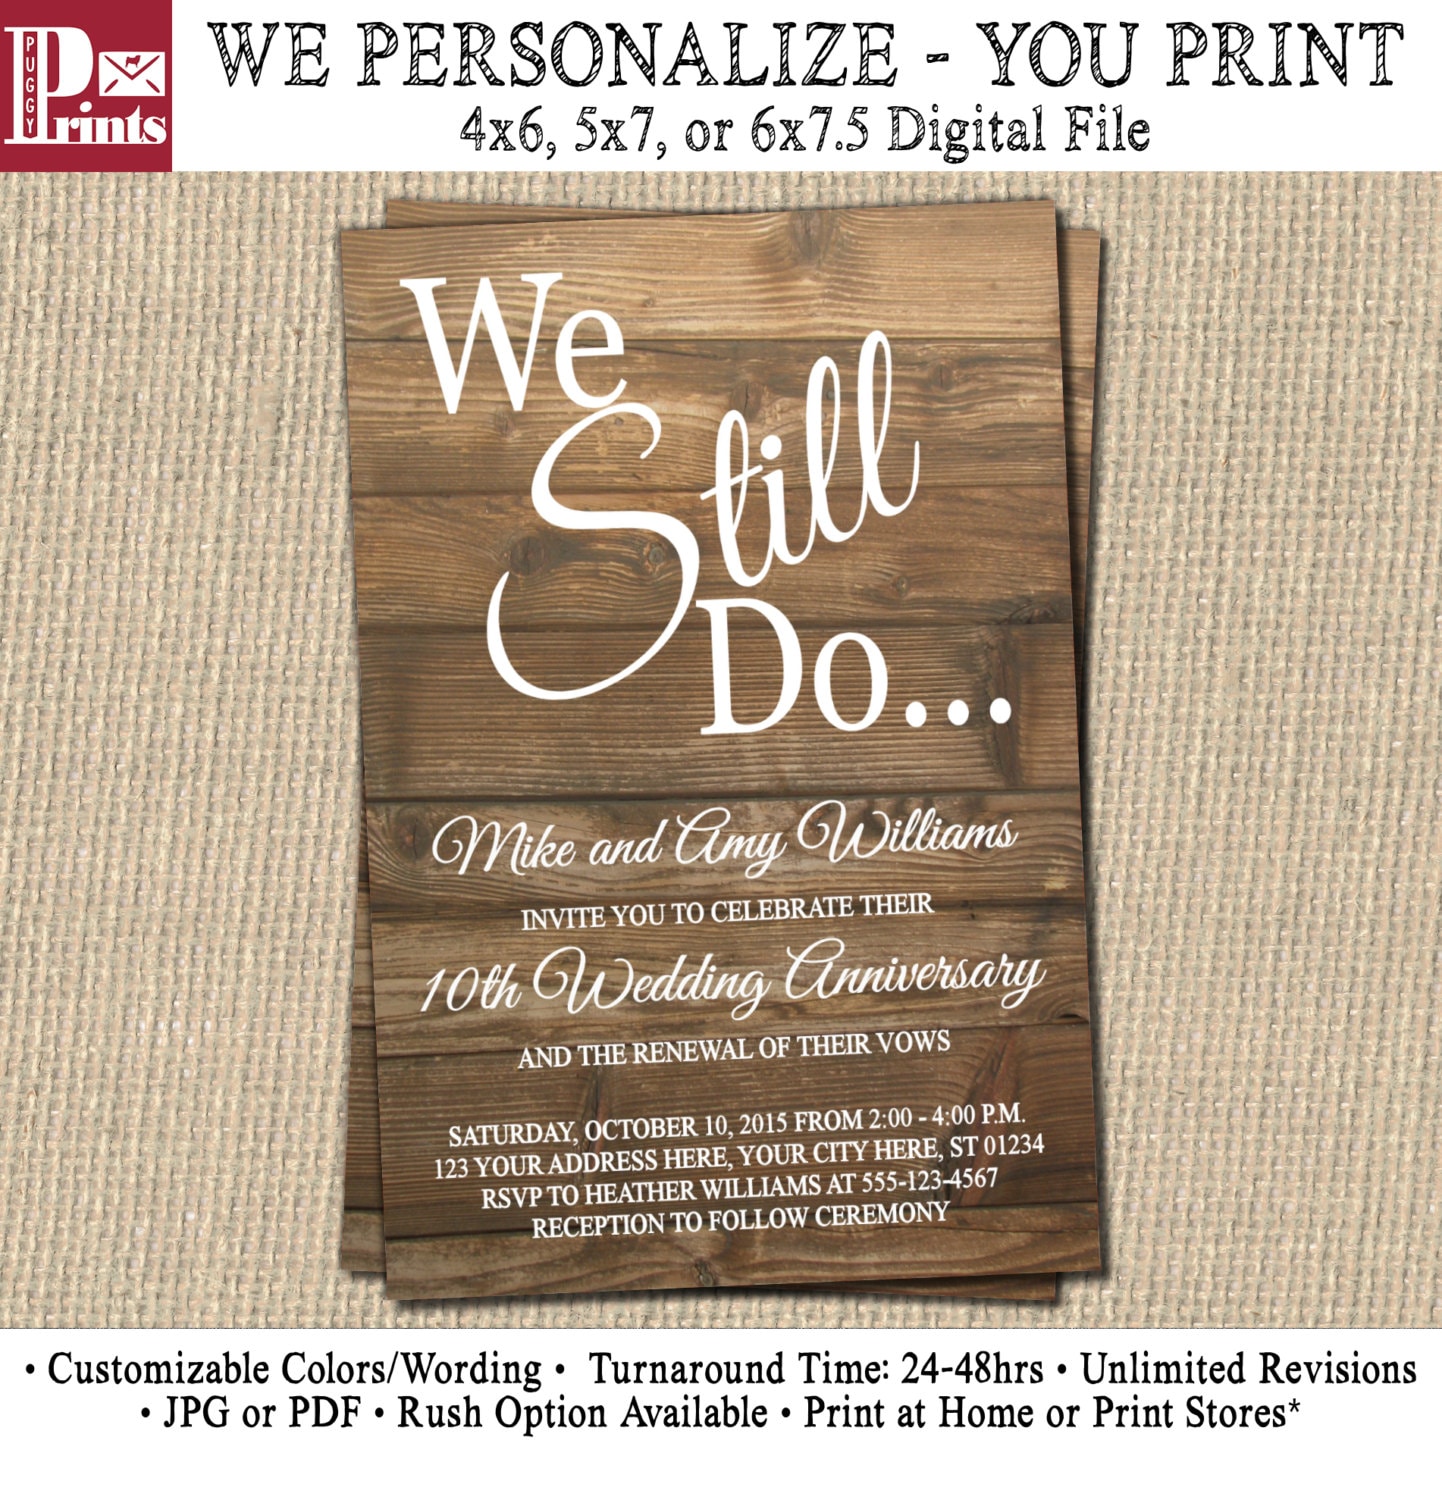 vow-renewal-invitation-wedding-anniversary-by-puggyprints-on-etsy